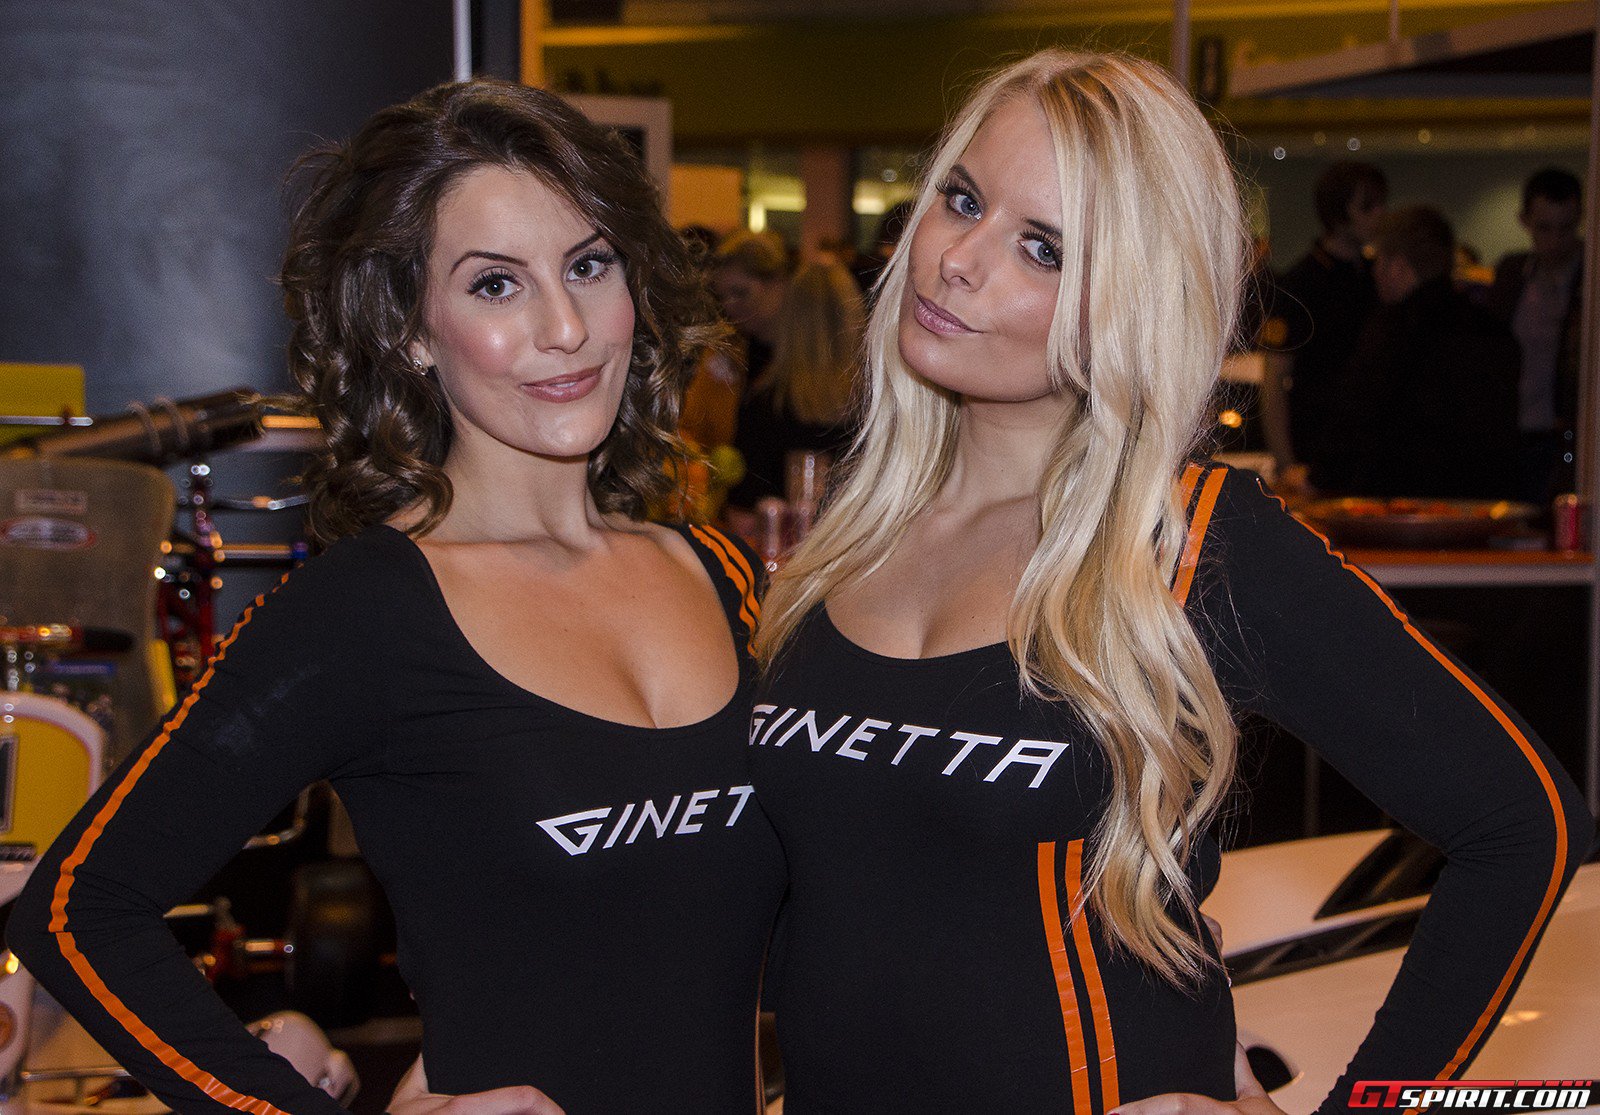 If you want to check out part 1 of the girls at Autosport ...